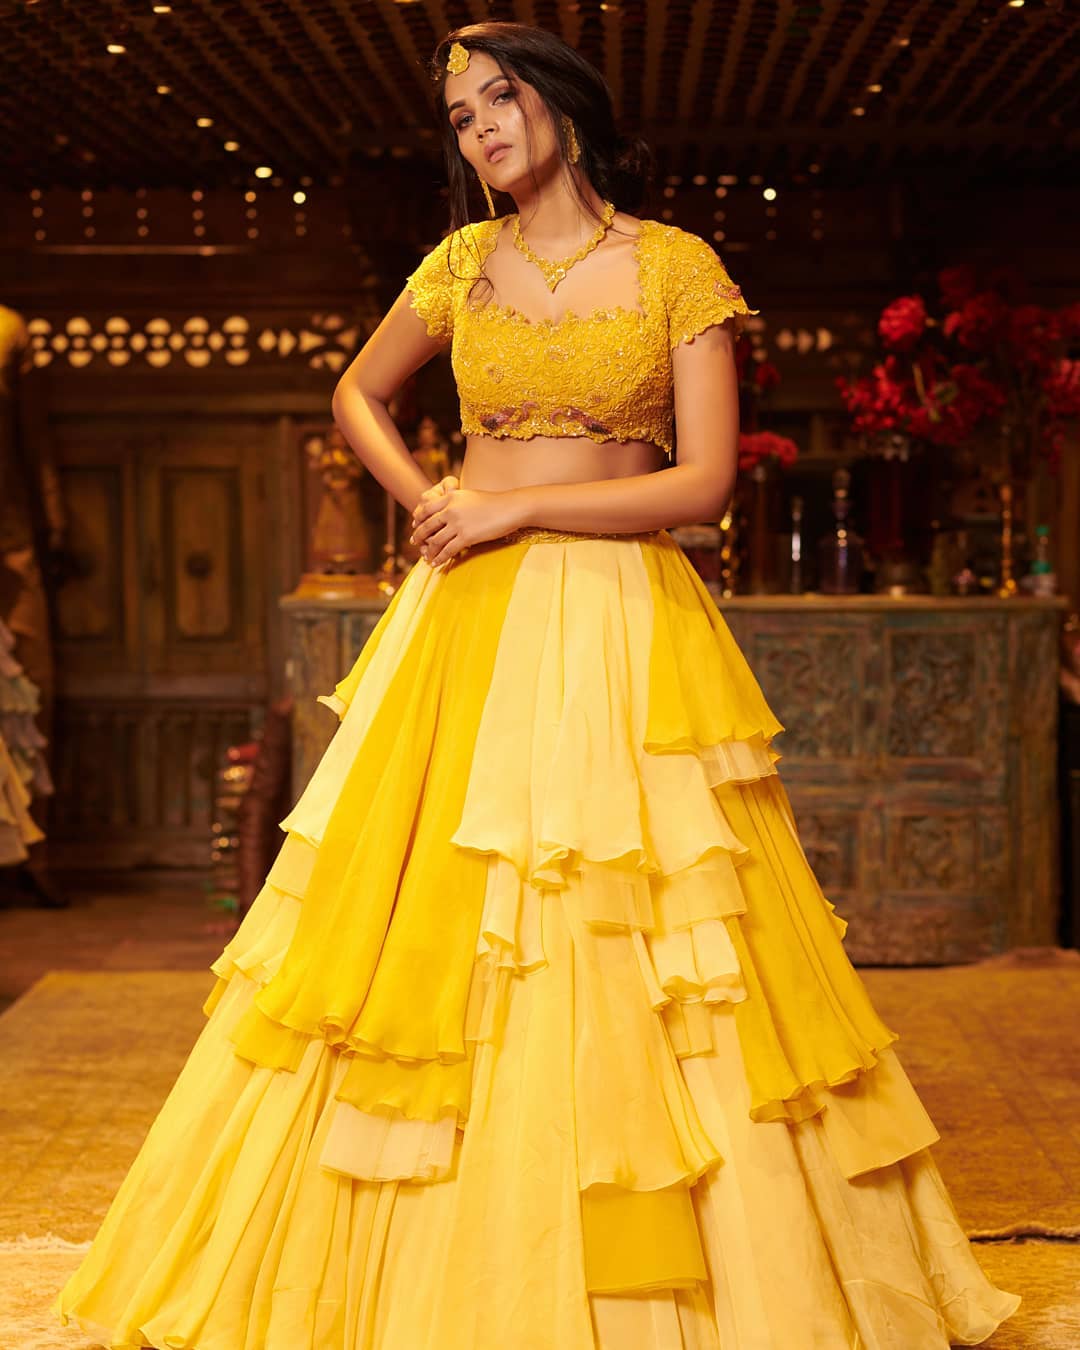 Check Out These Stores For The Best Bridal Lehengas In Chandni Chowk -  DforDelhi